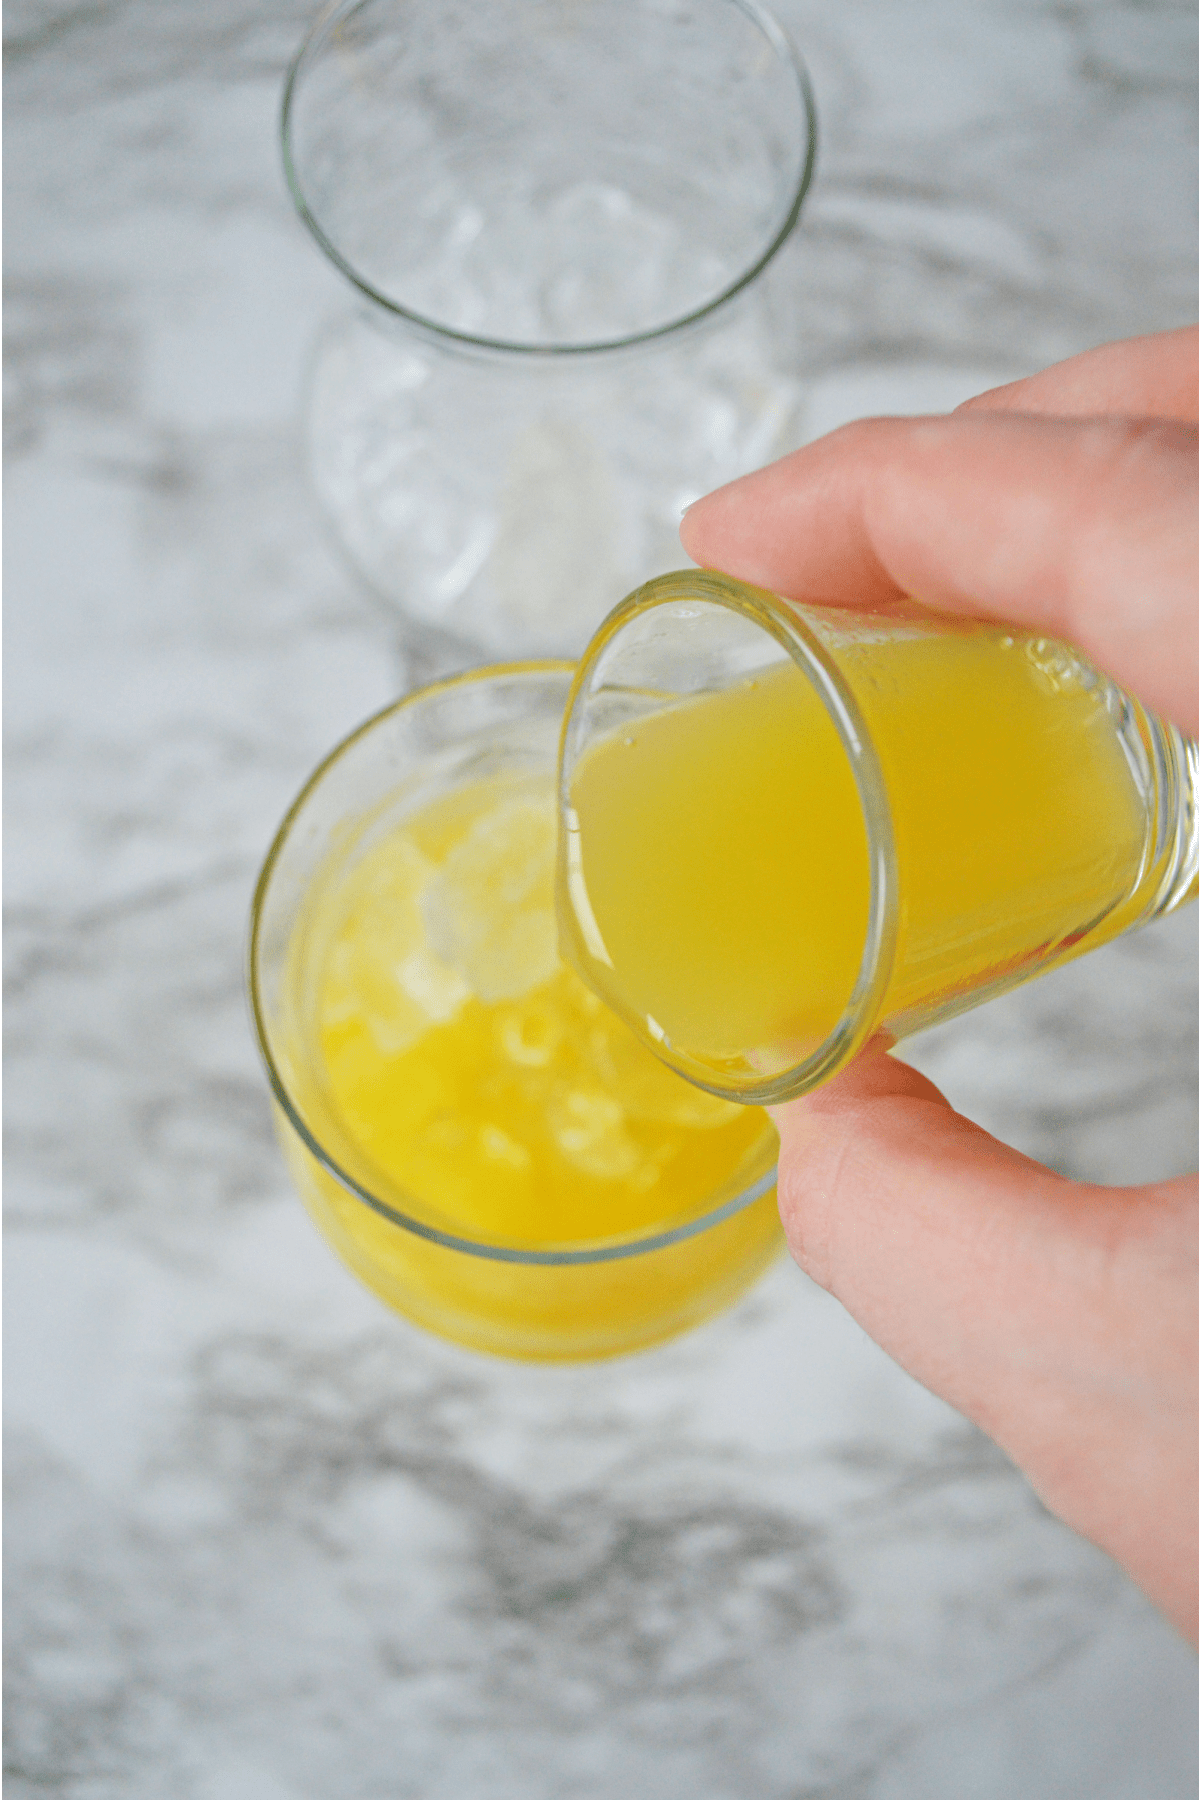 Orange juice being poured into glass